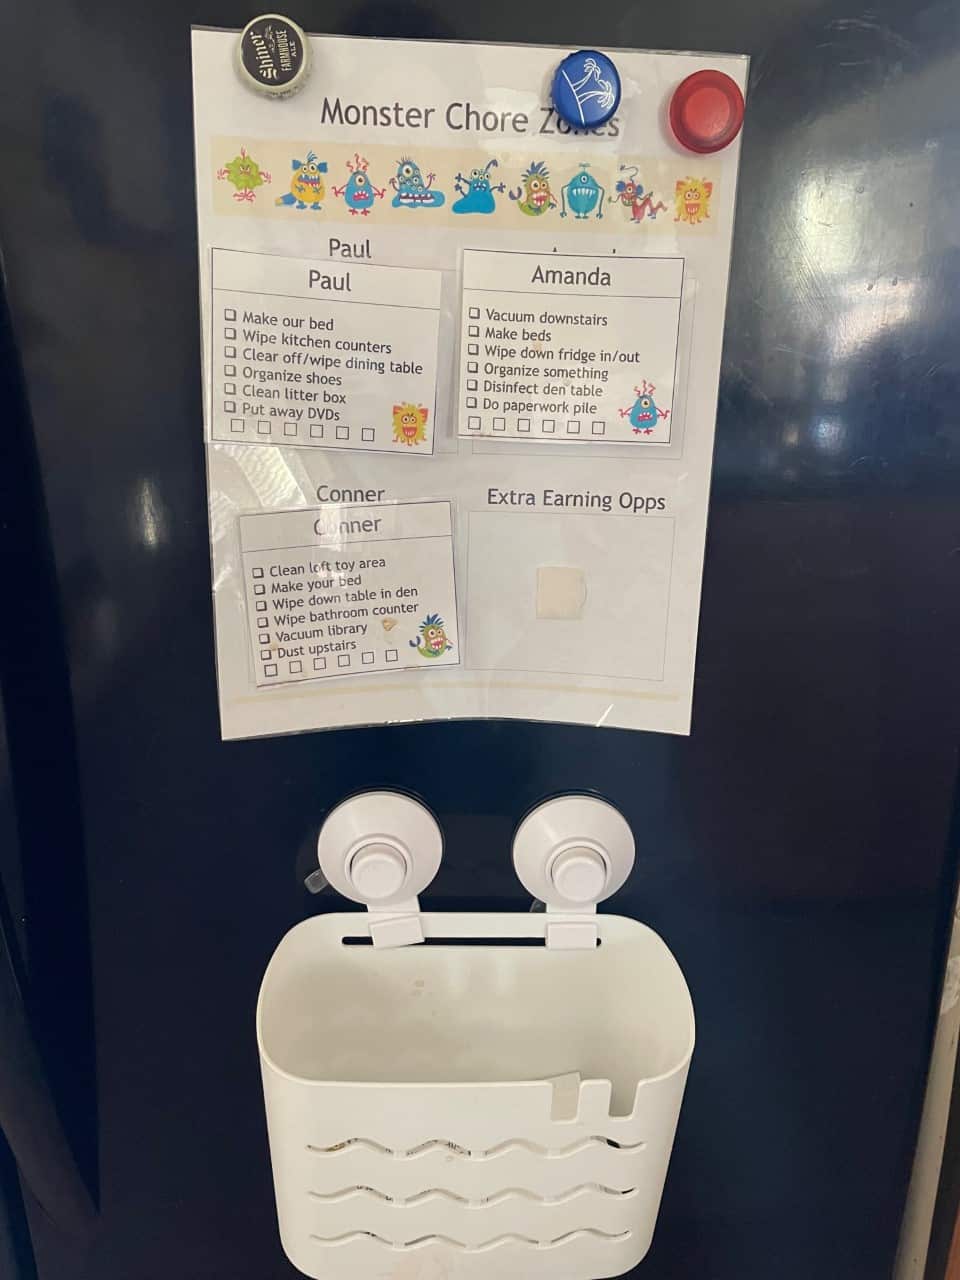 black fridge with monster chore chart with four squares on it for three people and extra earning opportunities, plus cards in a suction cup basket to rotate